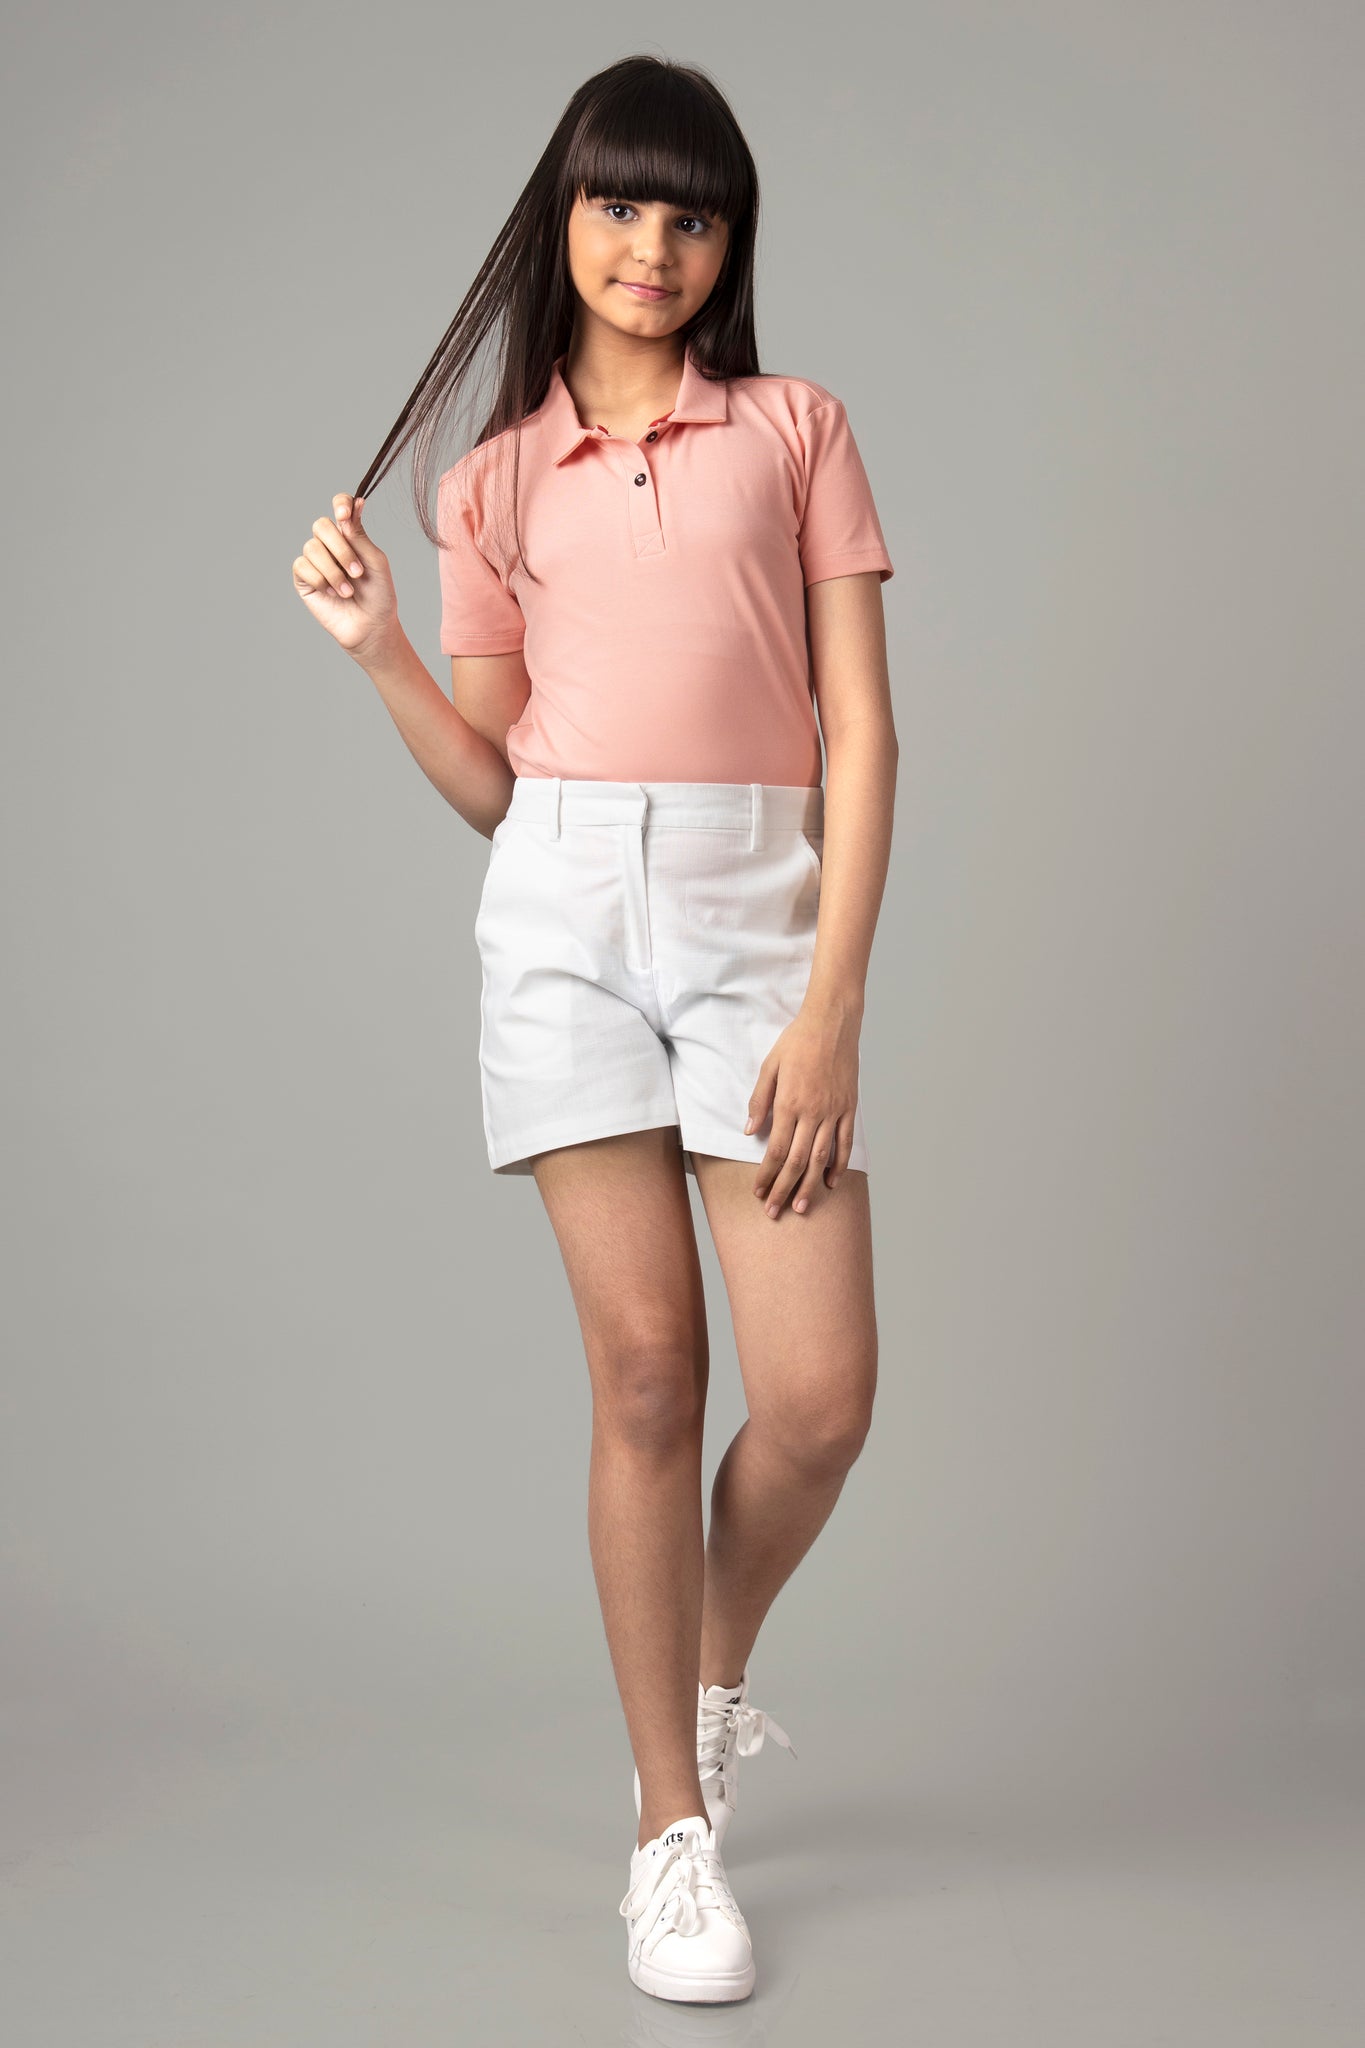 Exclusive Rose Pink Polo T-Shirt For Girls